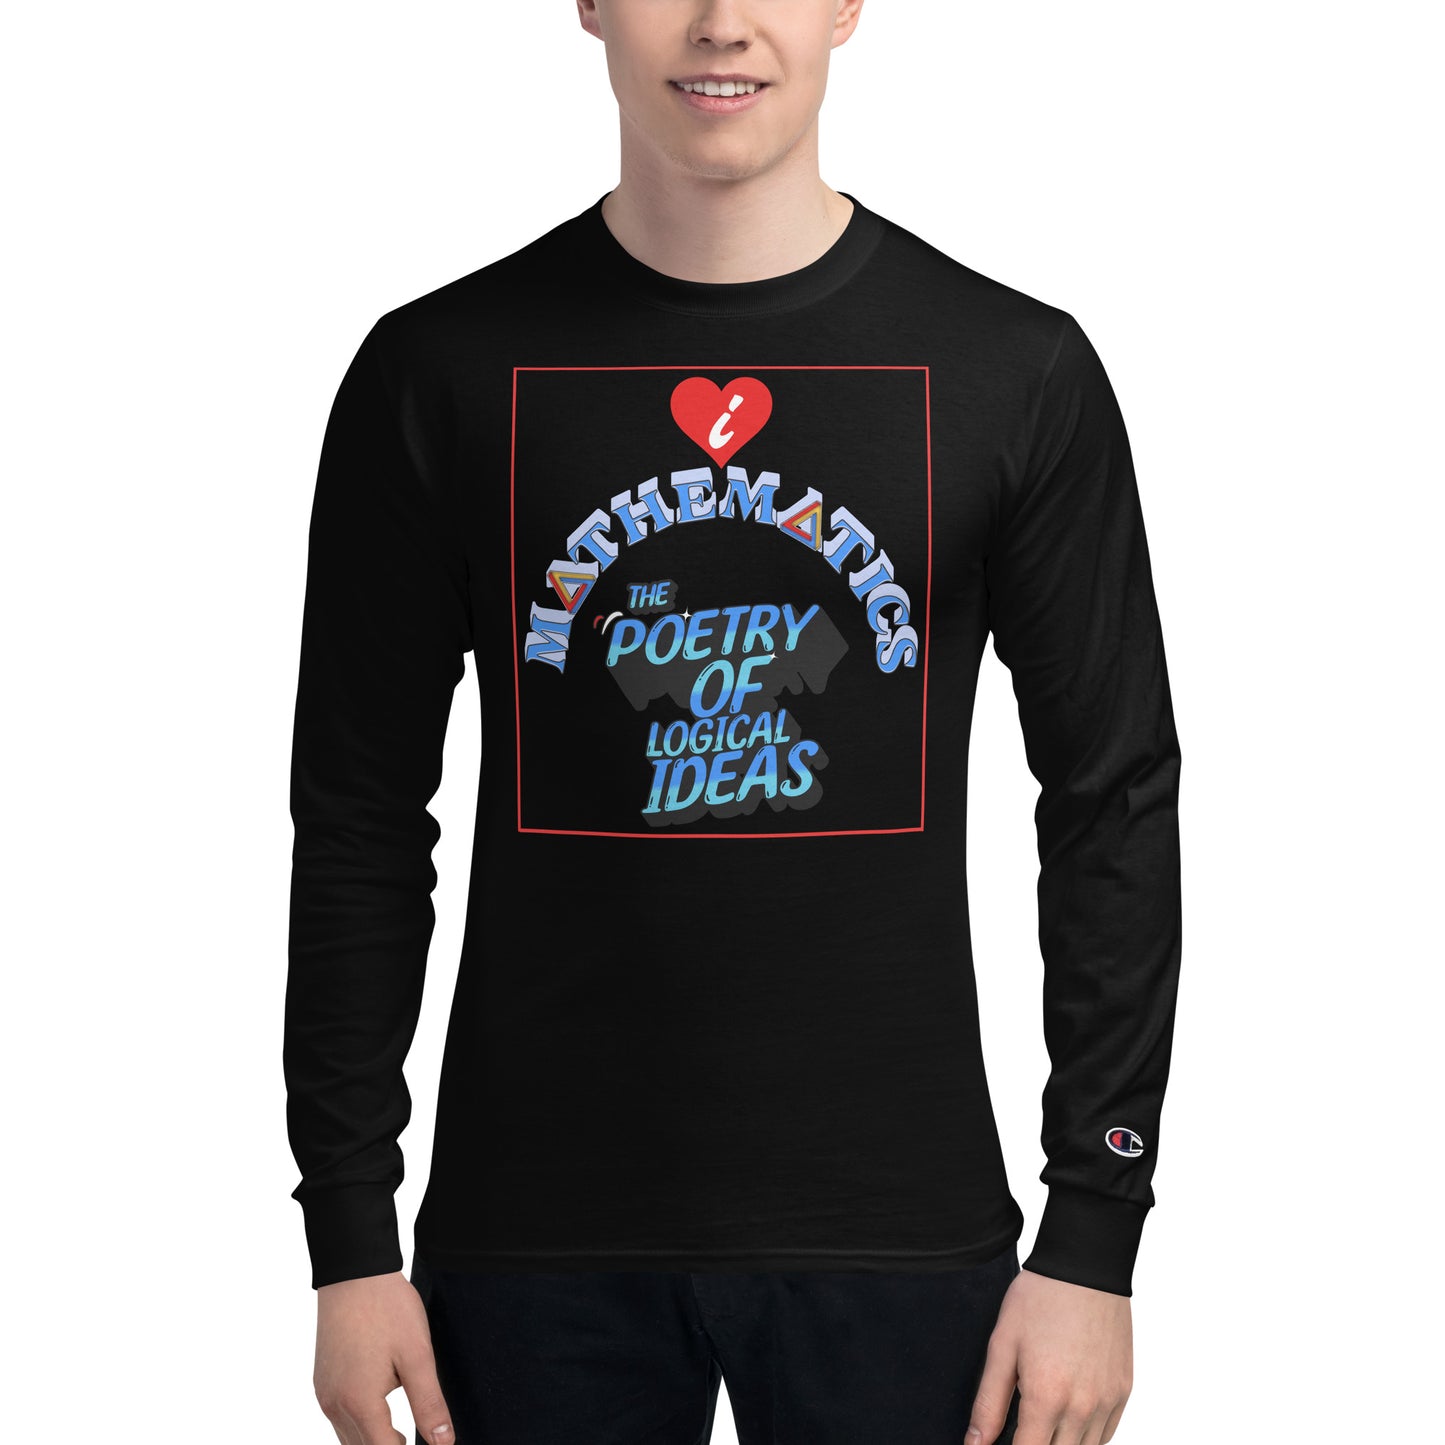 Men's Champion Long Sleeve Shirt - Maths: The Poetry Of Logical Ideas